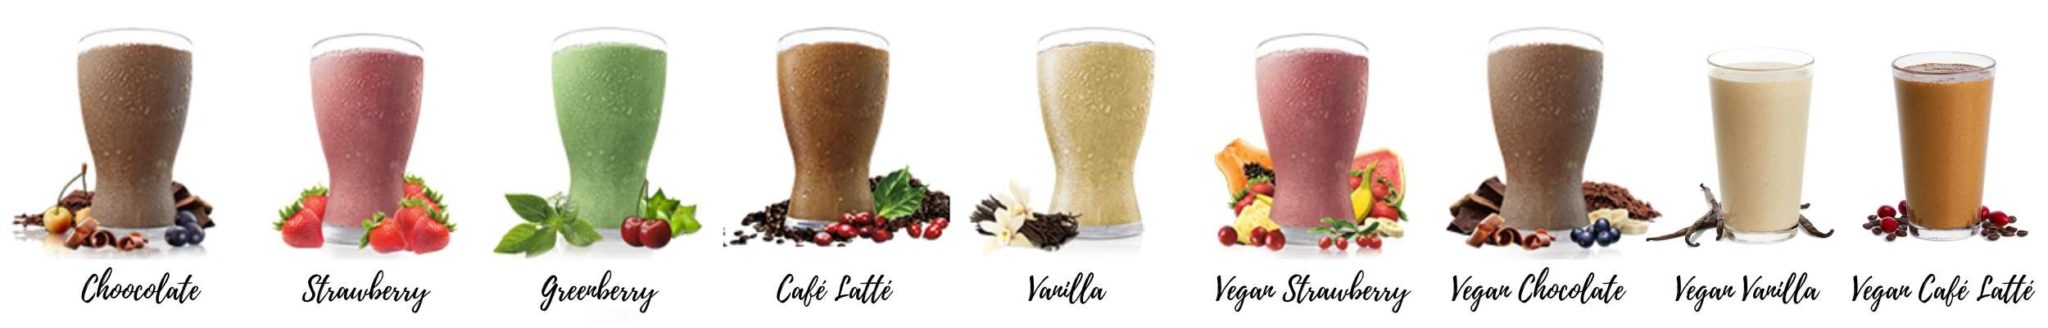 Current Shakeology Flavors | THEFITCLUBNETWORK.COM